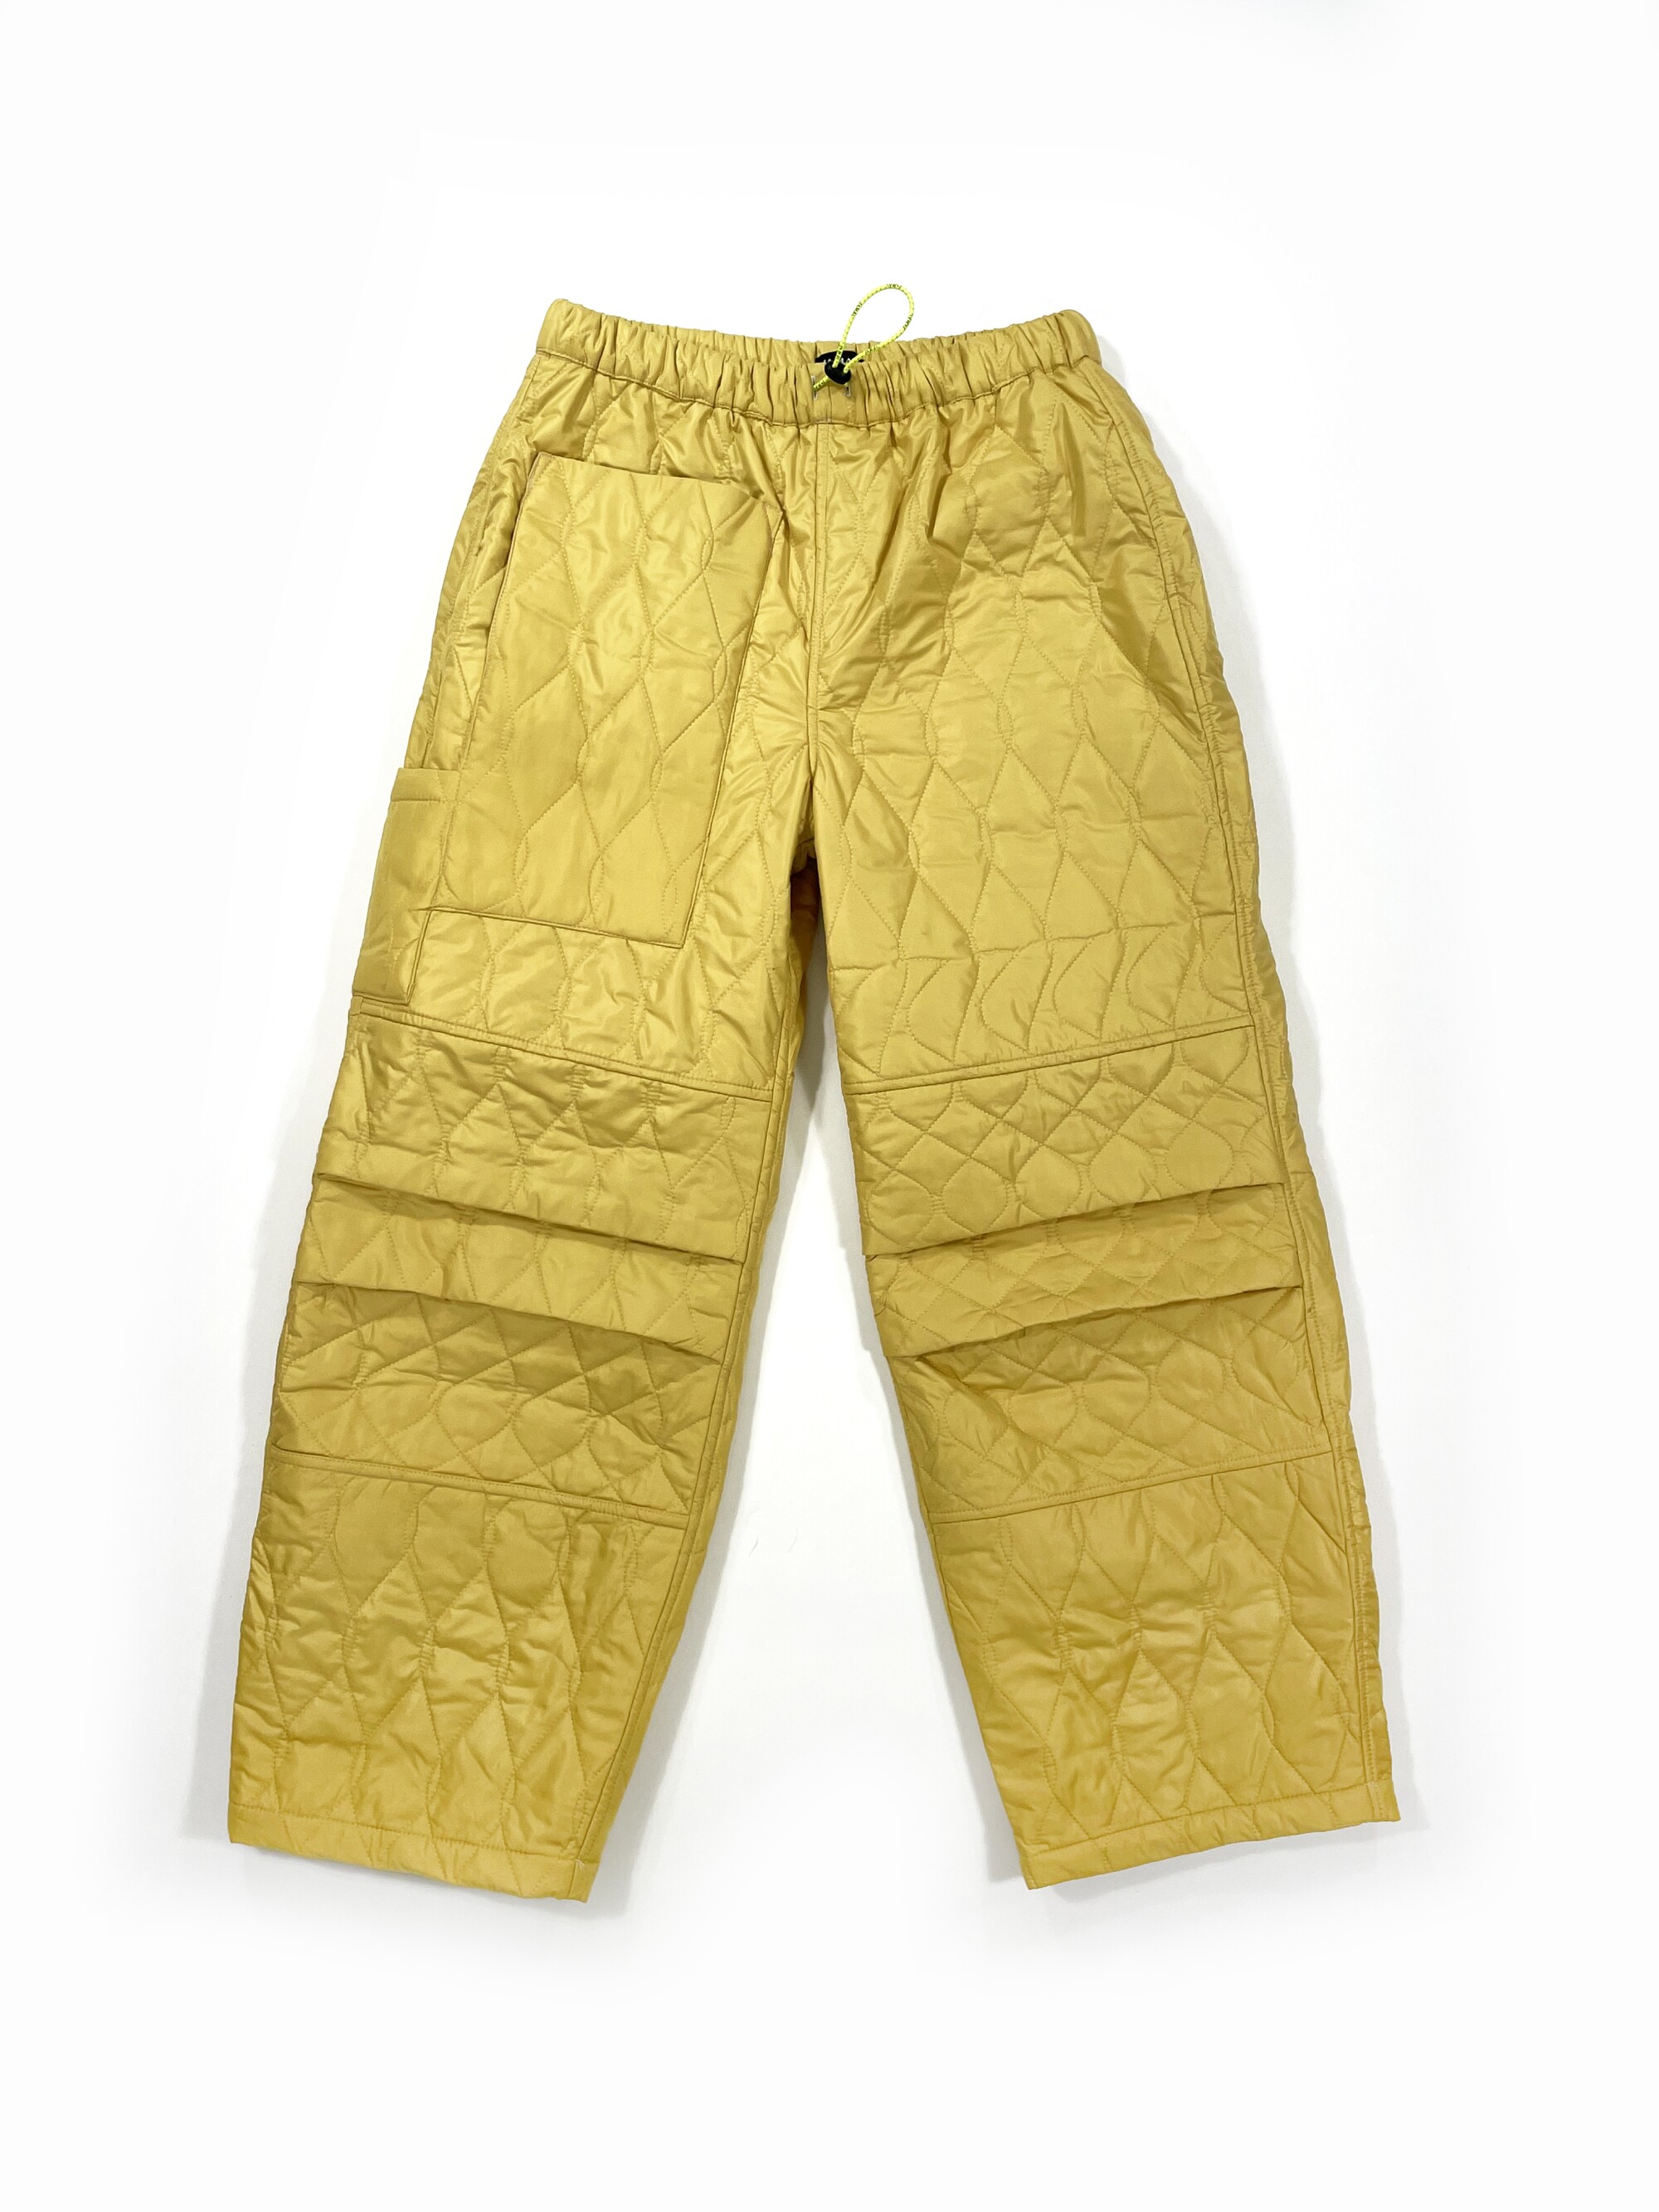 Quilted yellow pants